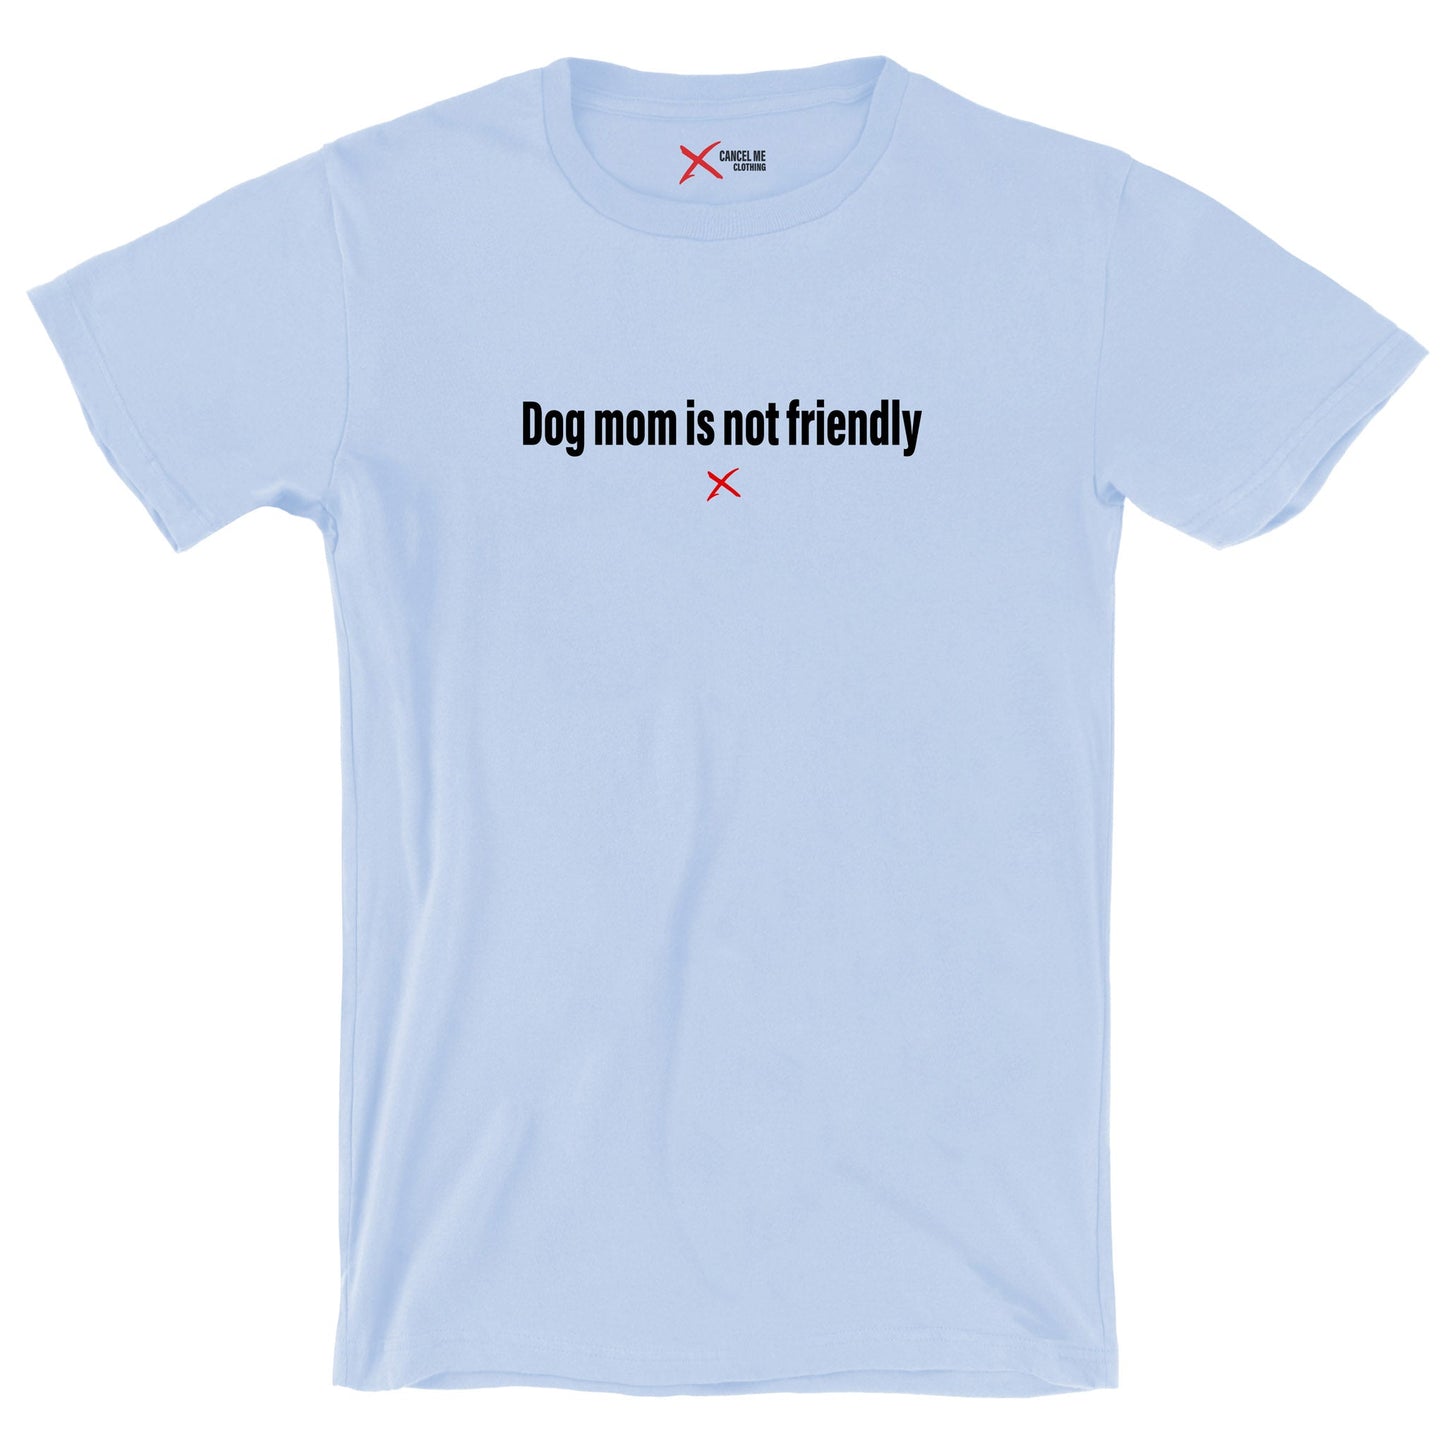 Dog mom is not friendly - Shirt